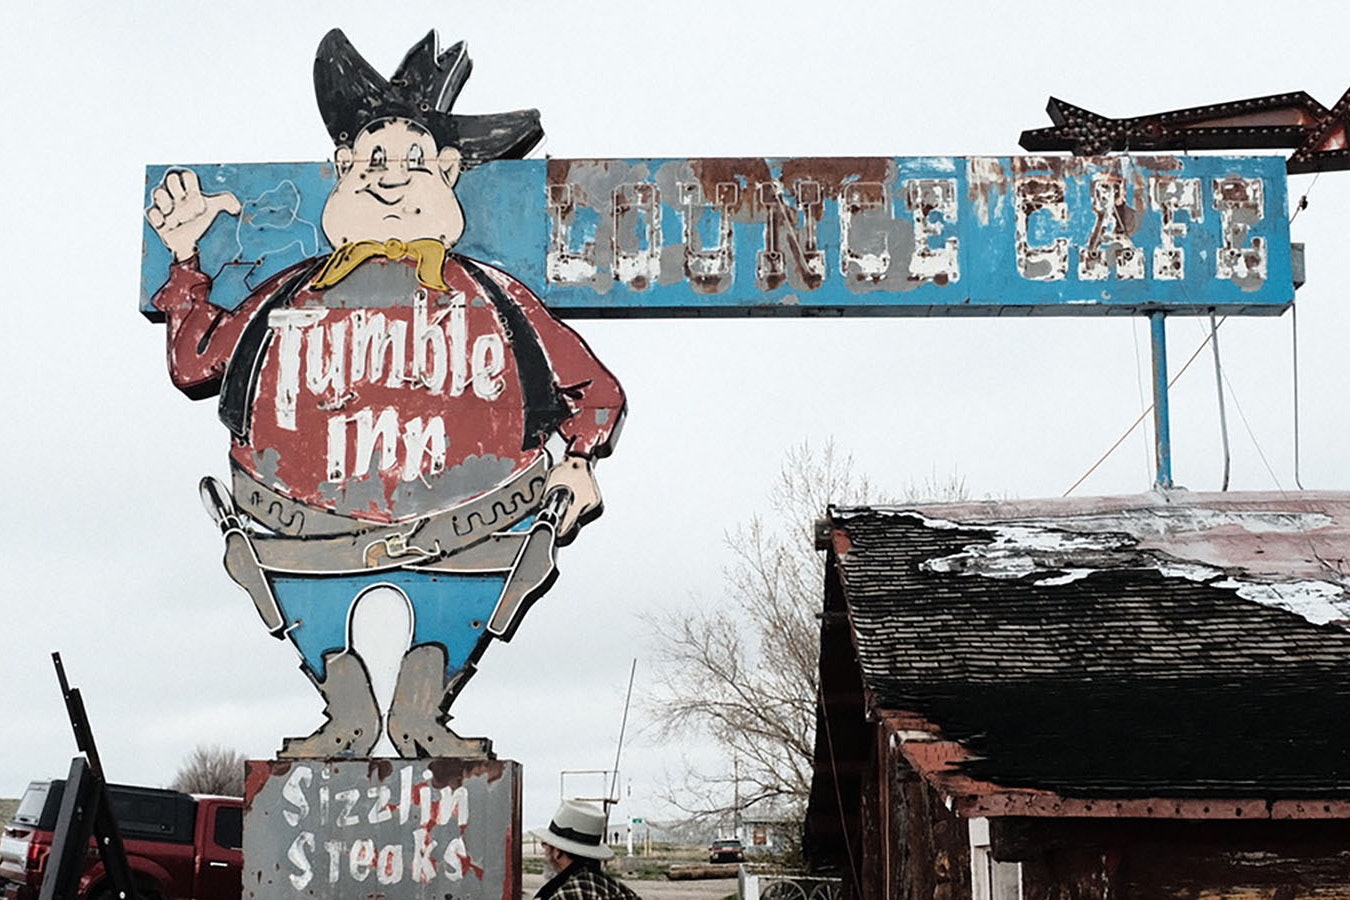 The Tumble Inn sign before its hat and top of the cowboy's head was removed to begin restoration. When they saw the top off of it, some people speculated wind had blown the top off.